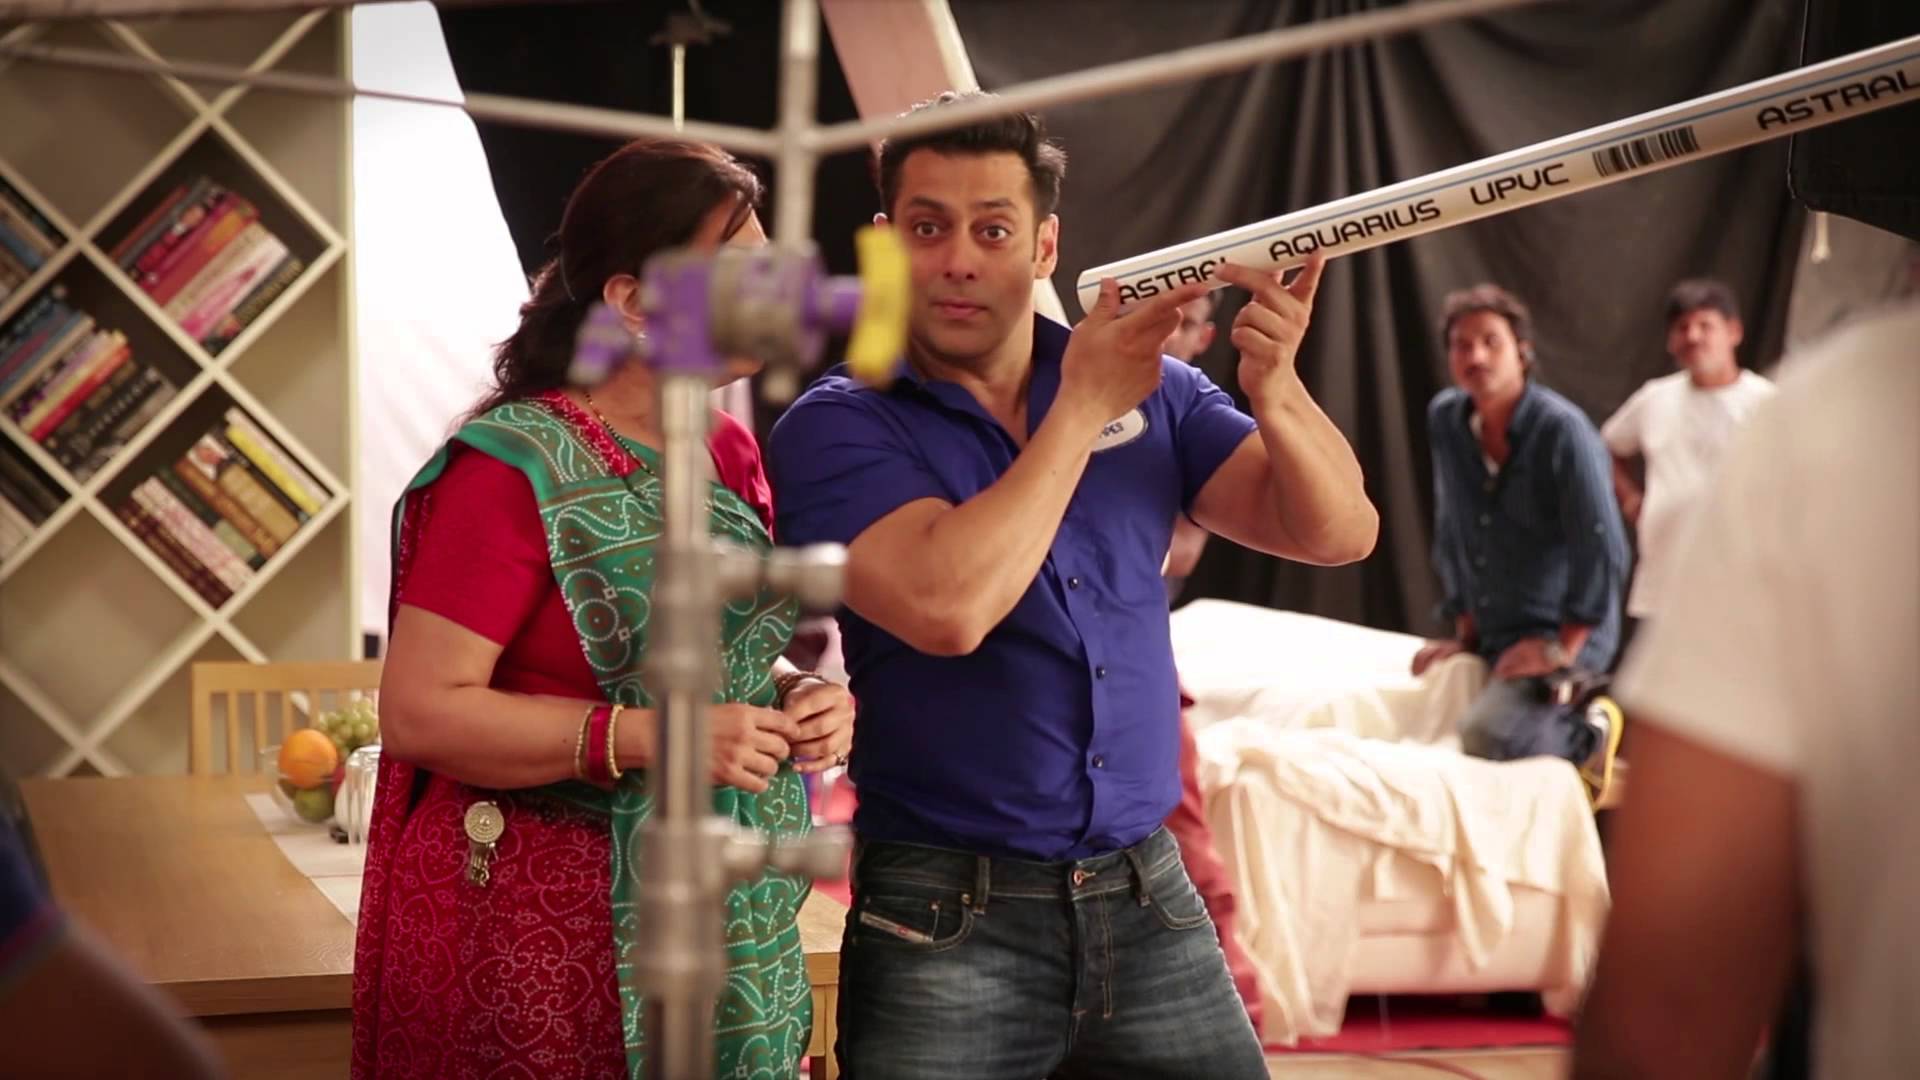 BEHIND THE SCENES - ASTRAL PIPES - SALMAN KHAN TVC - YouTube